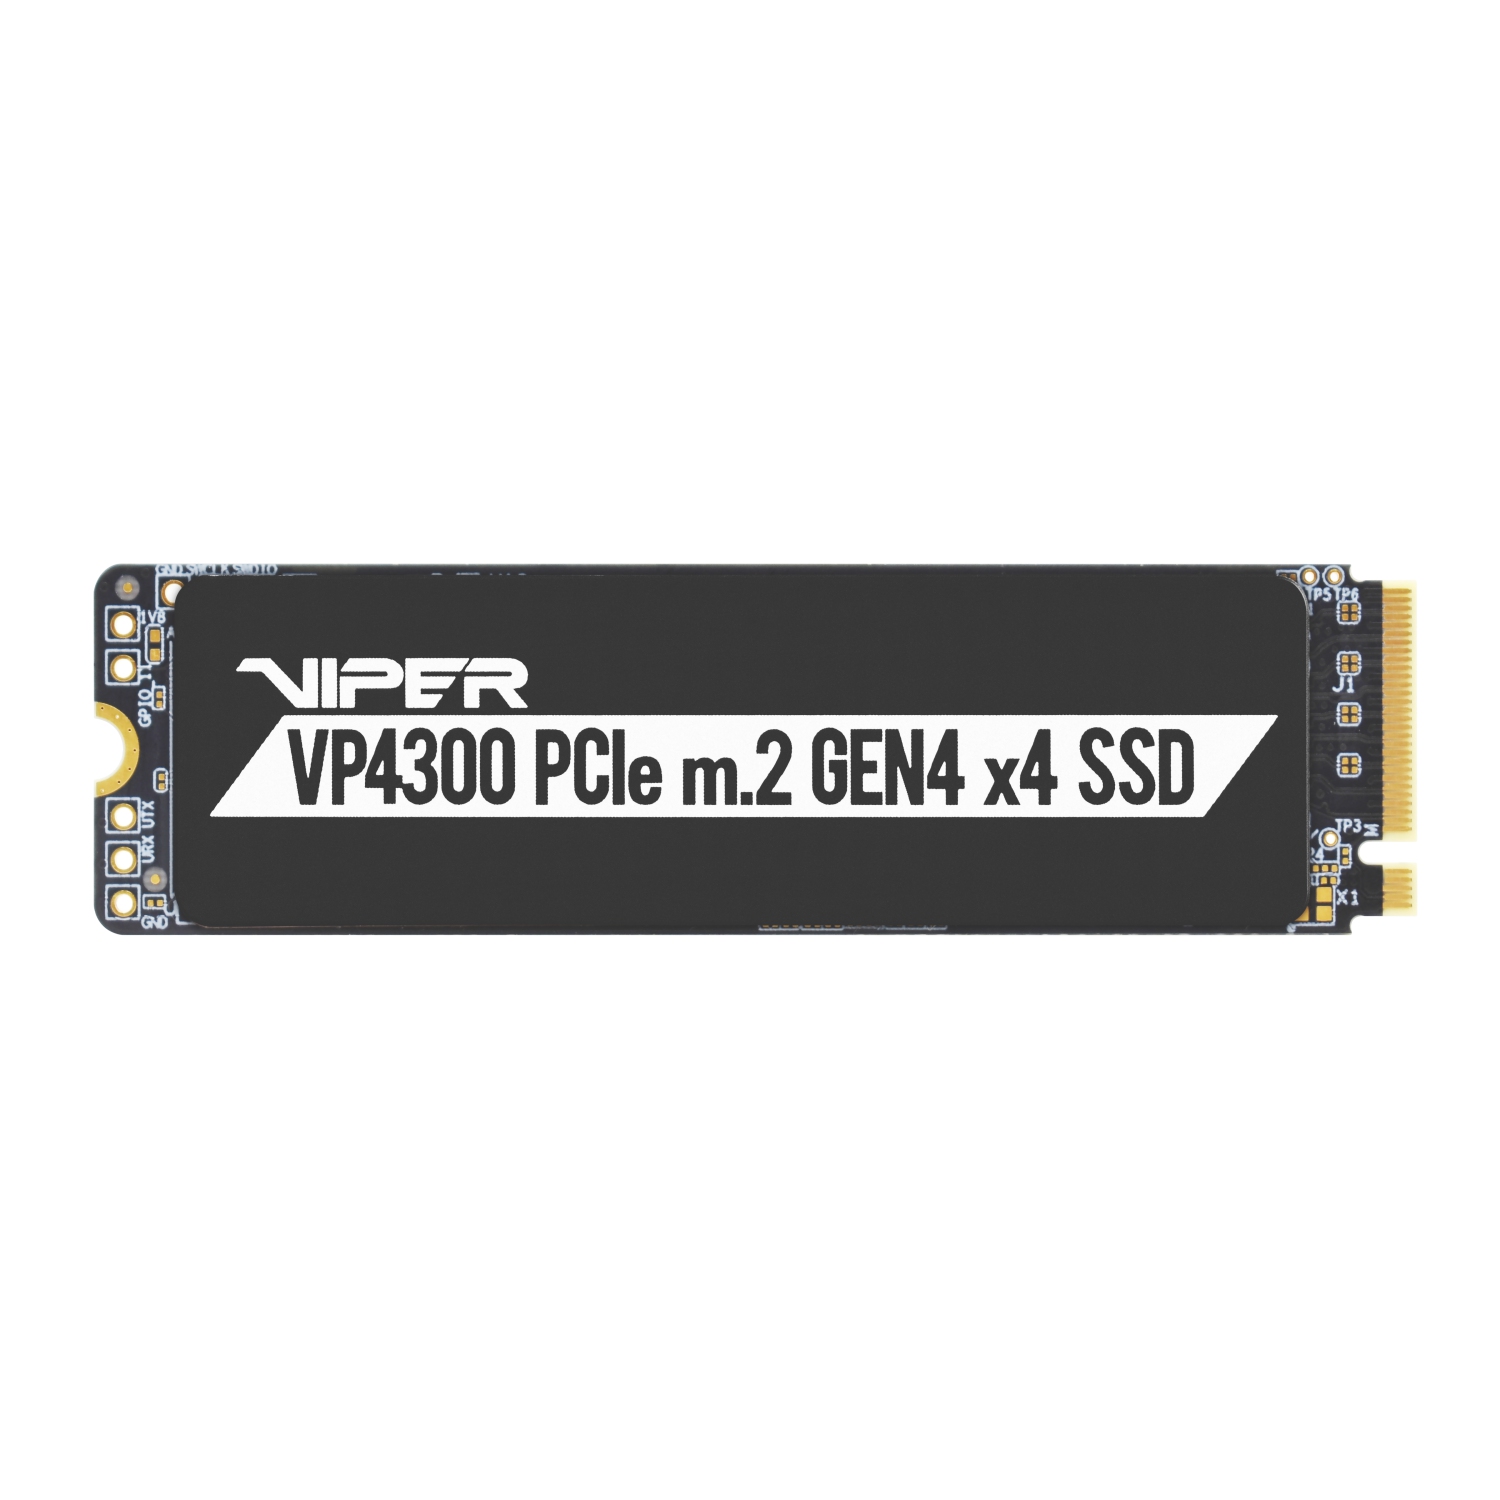 Patriot Viper VP4300 2TB Internal SSD W/HS - NVMe PCIe Gen 4x4 - M.2 2280 - Solid State Drive - VP4300-2TBM28H, Compatible with PS5